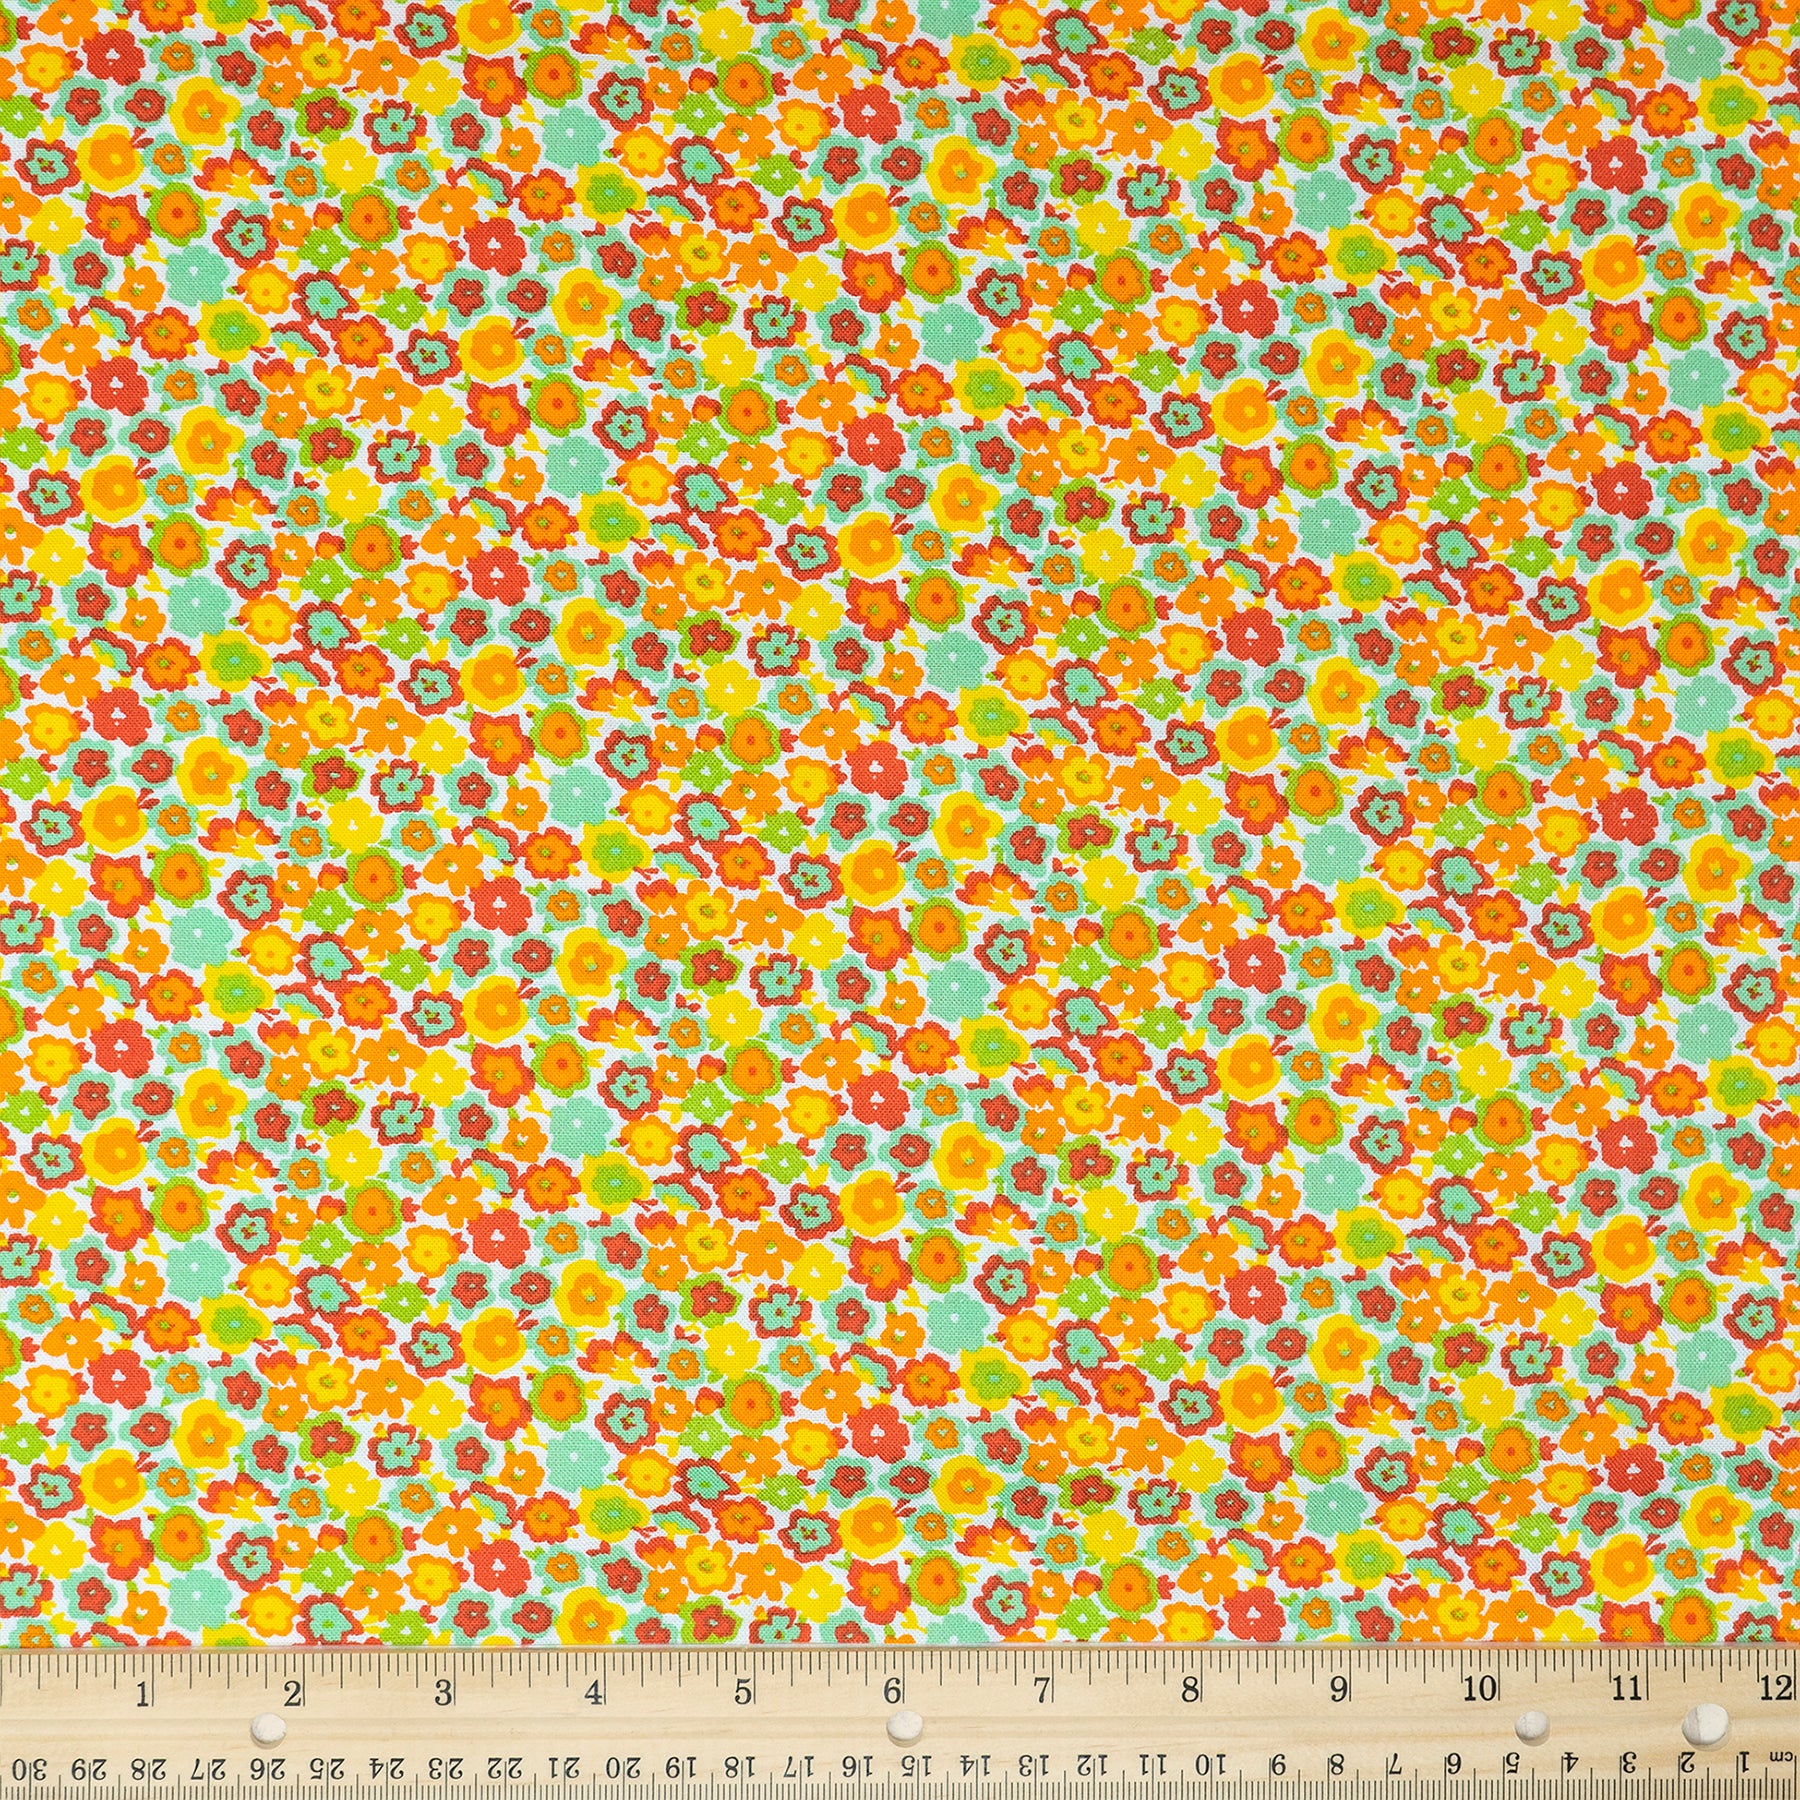 Waverly Inspirations Cotton 44" Disty Flower Orange Color Sewing Fabric by the Yard